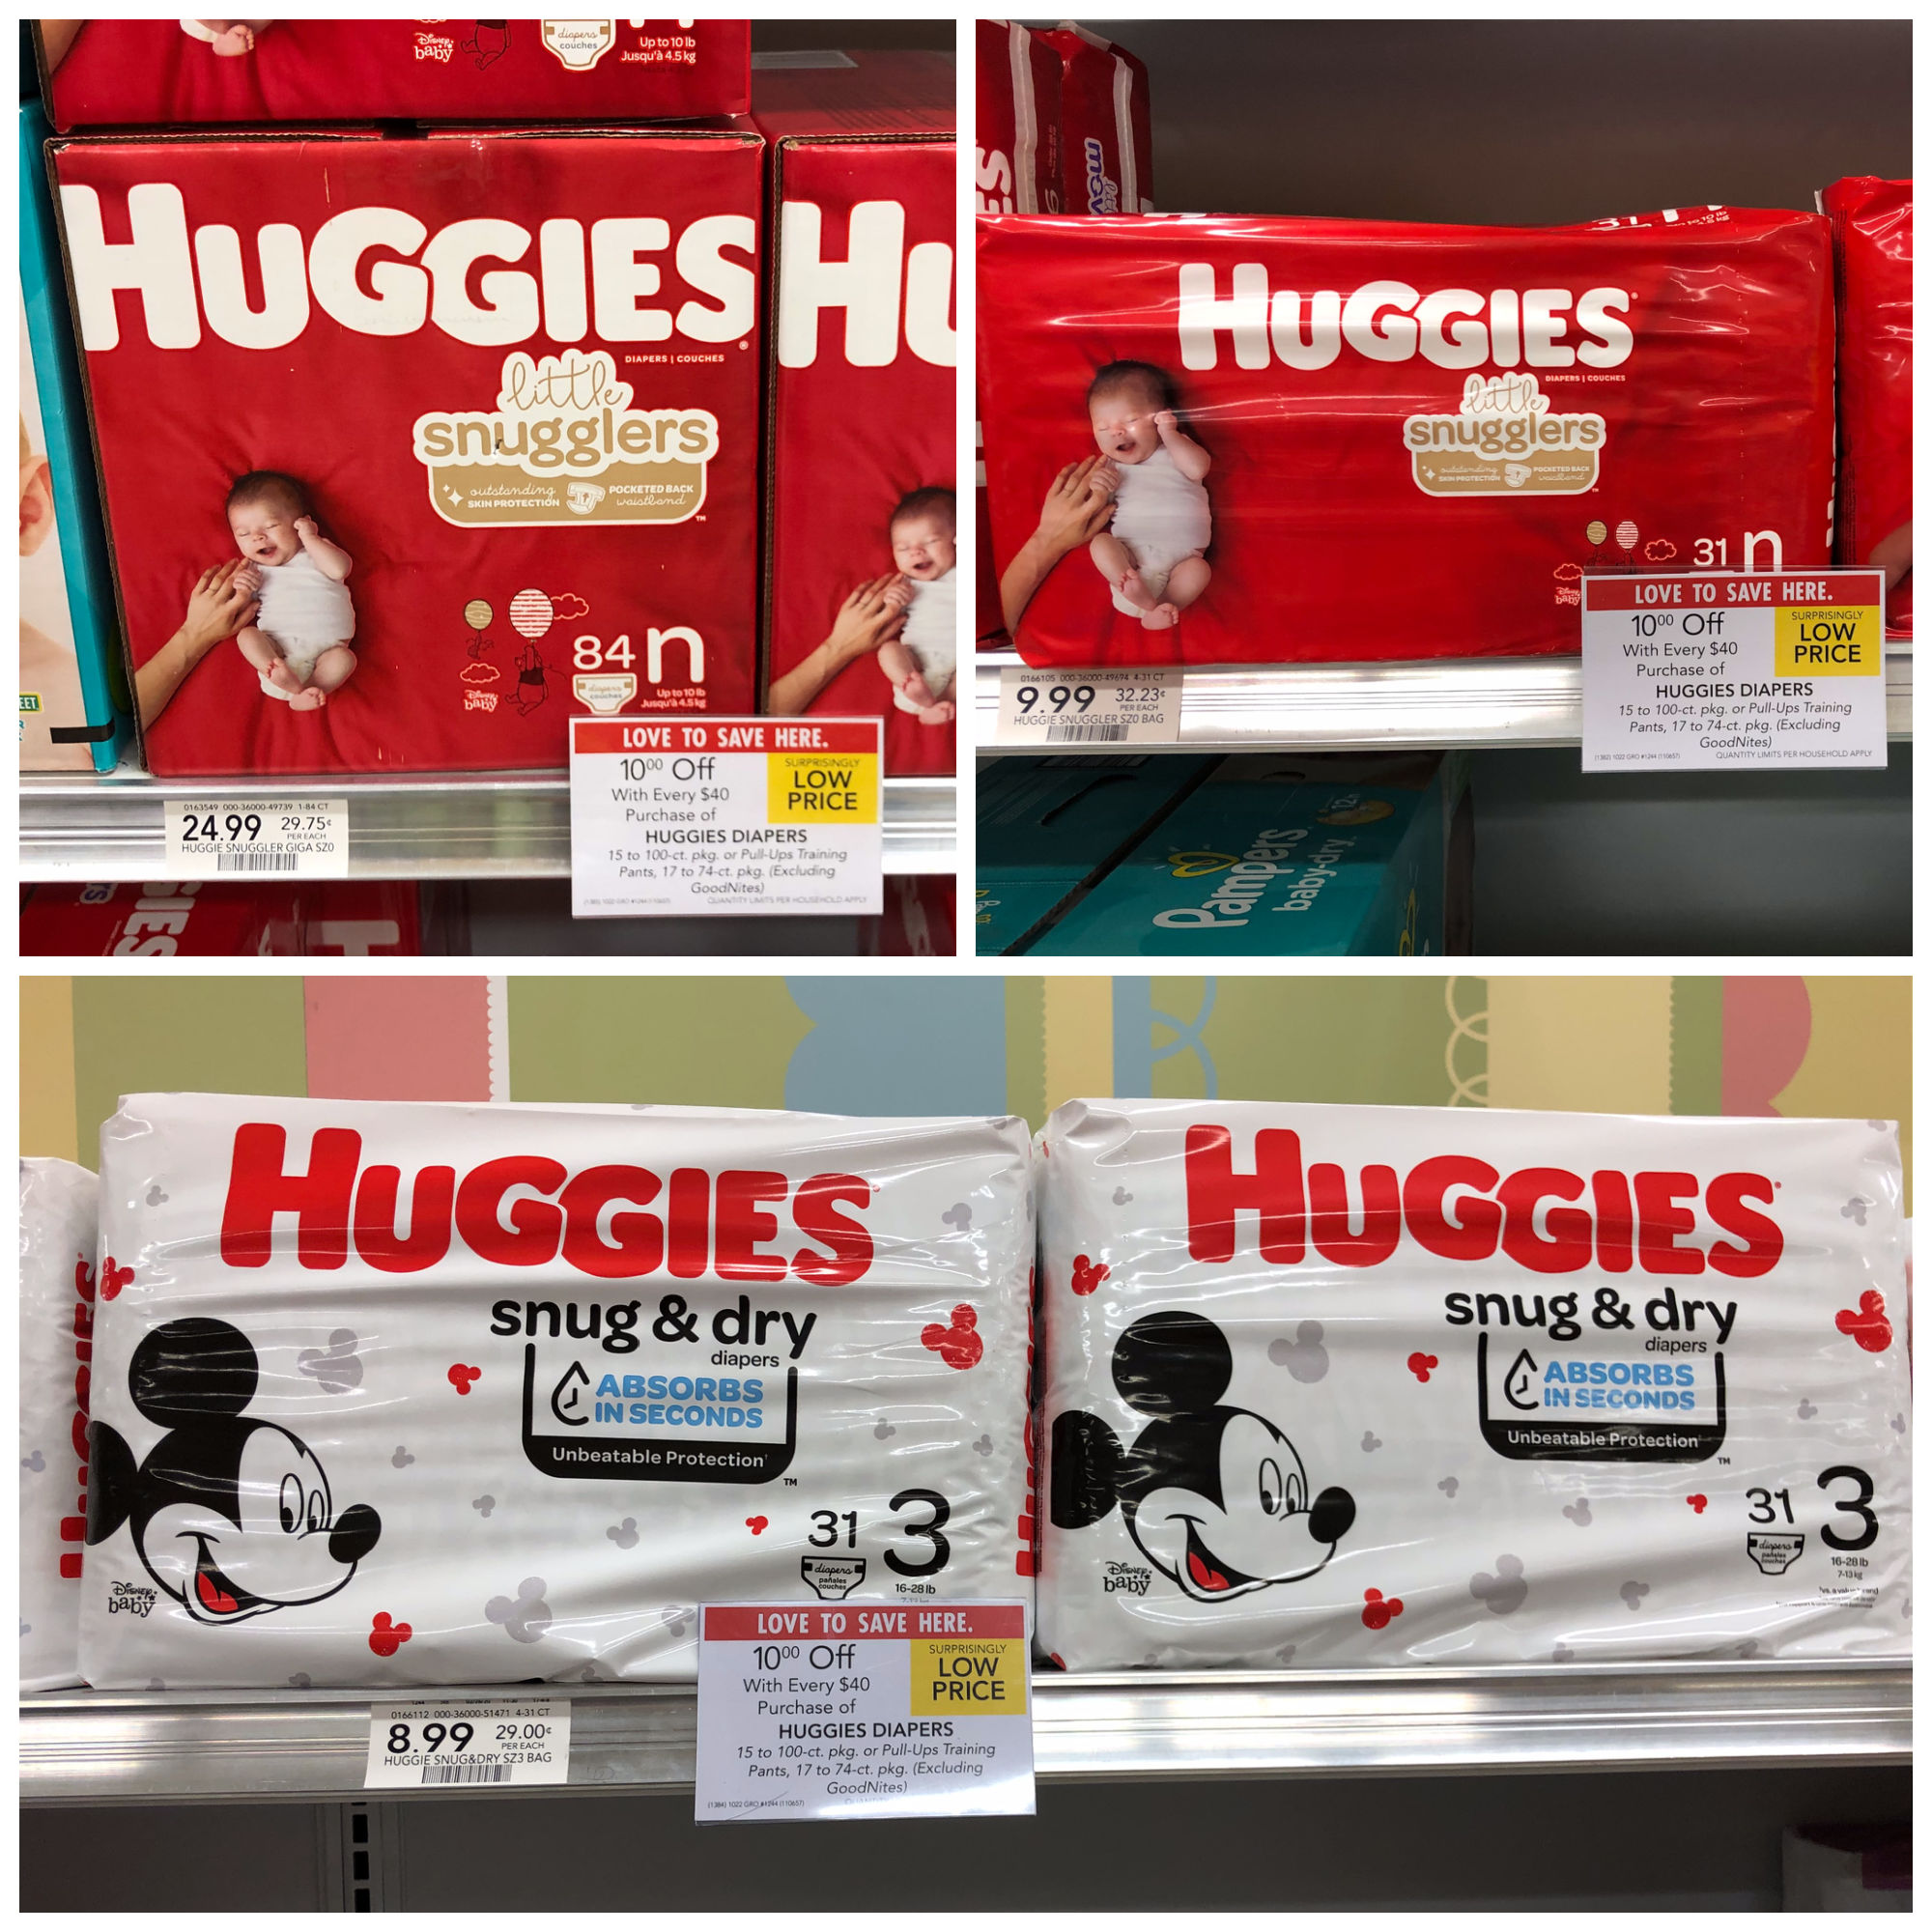 Get Instant Savings On Huggies Diapers & Pull-Ups This Week At Publix on I Heart Publix